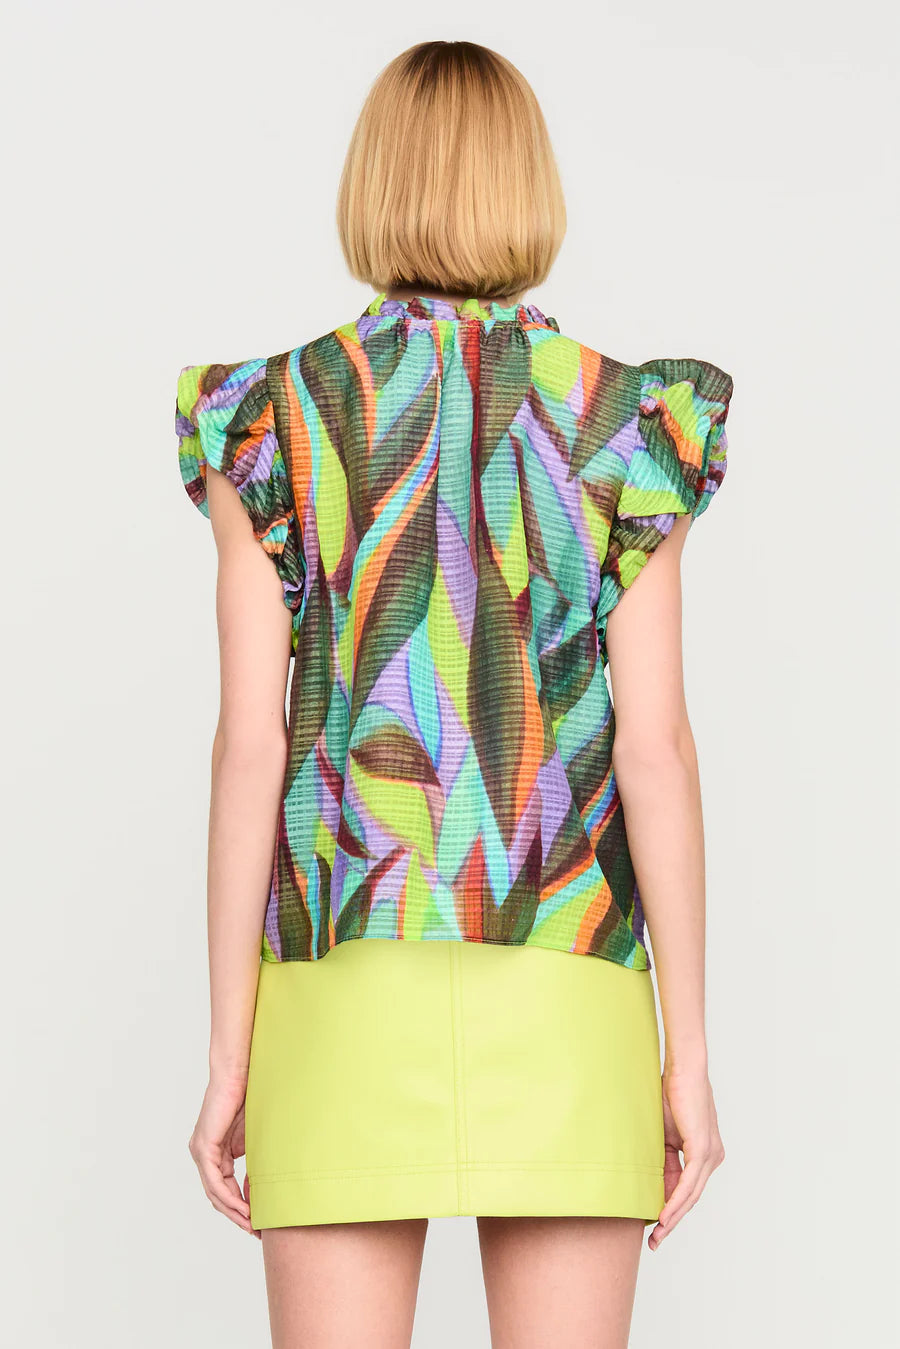 Maison Top by Marie Oliver in Tropadelic